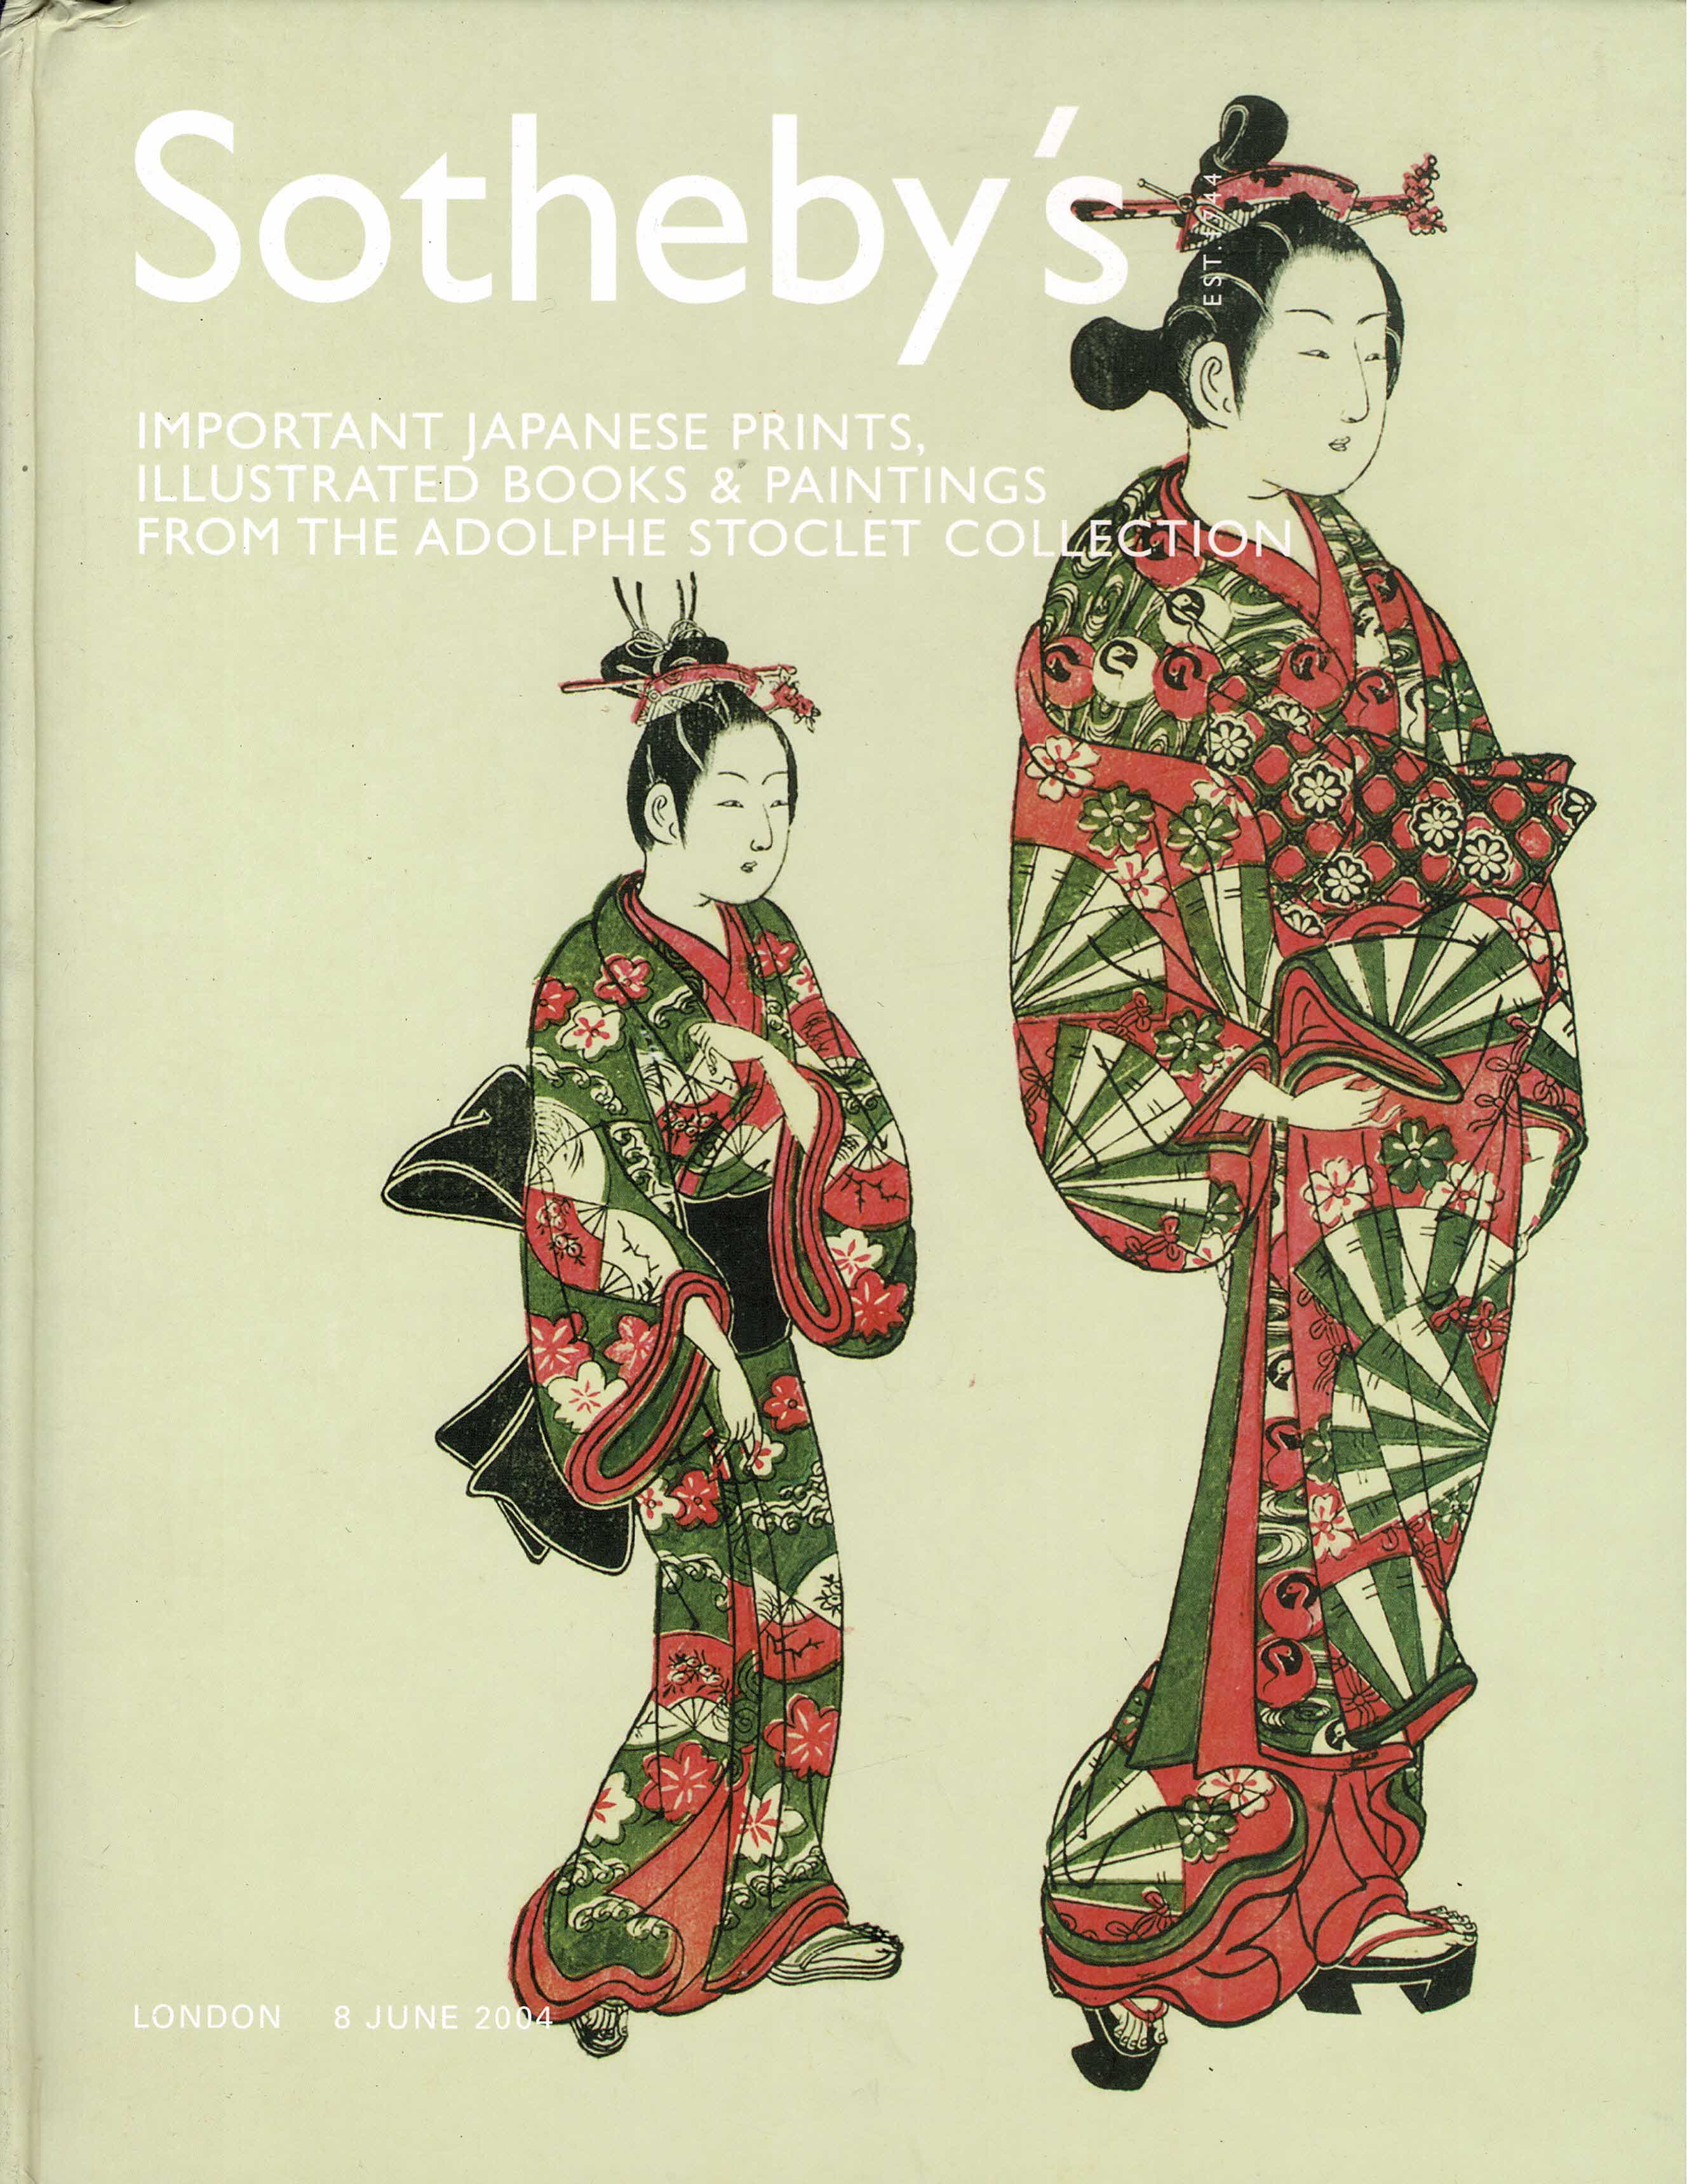 Sotheby's - Important Japanese Prints, illustrated Books & Paintings from the Adolphe Stoclet Collection